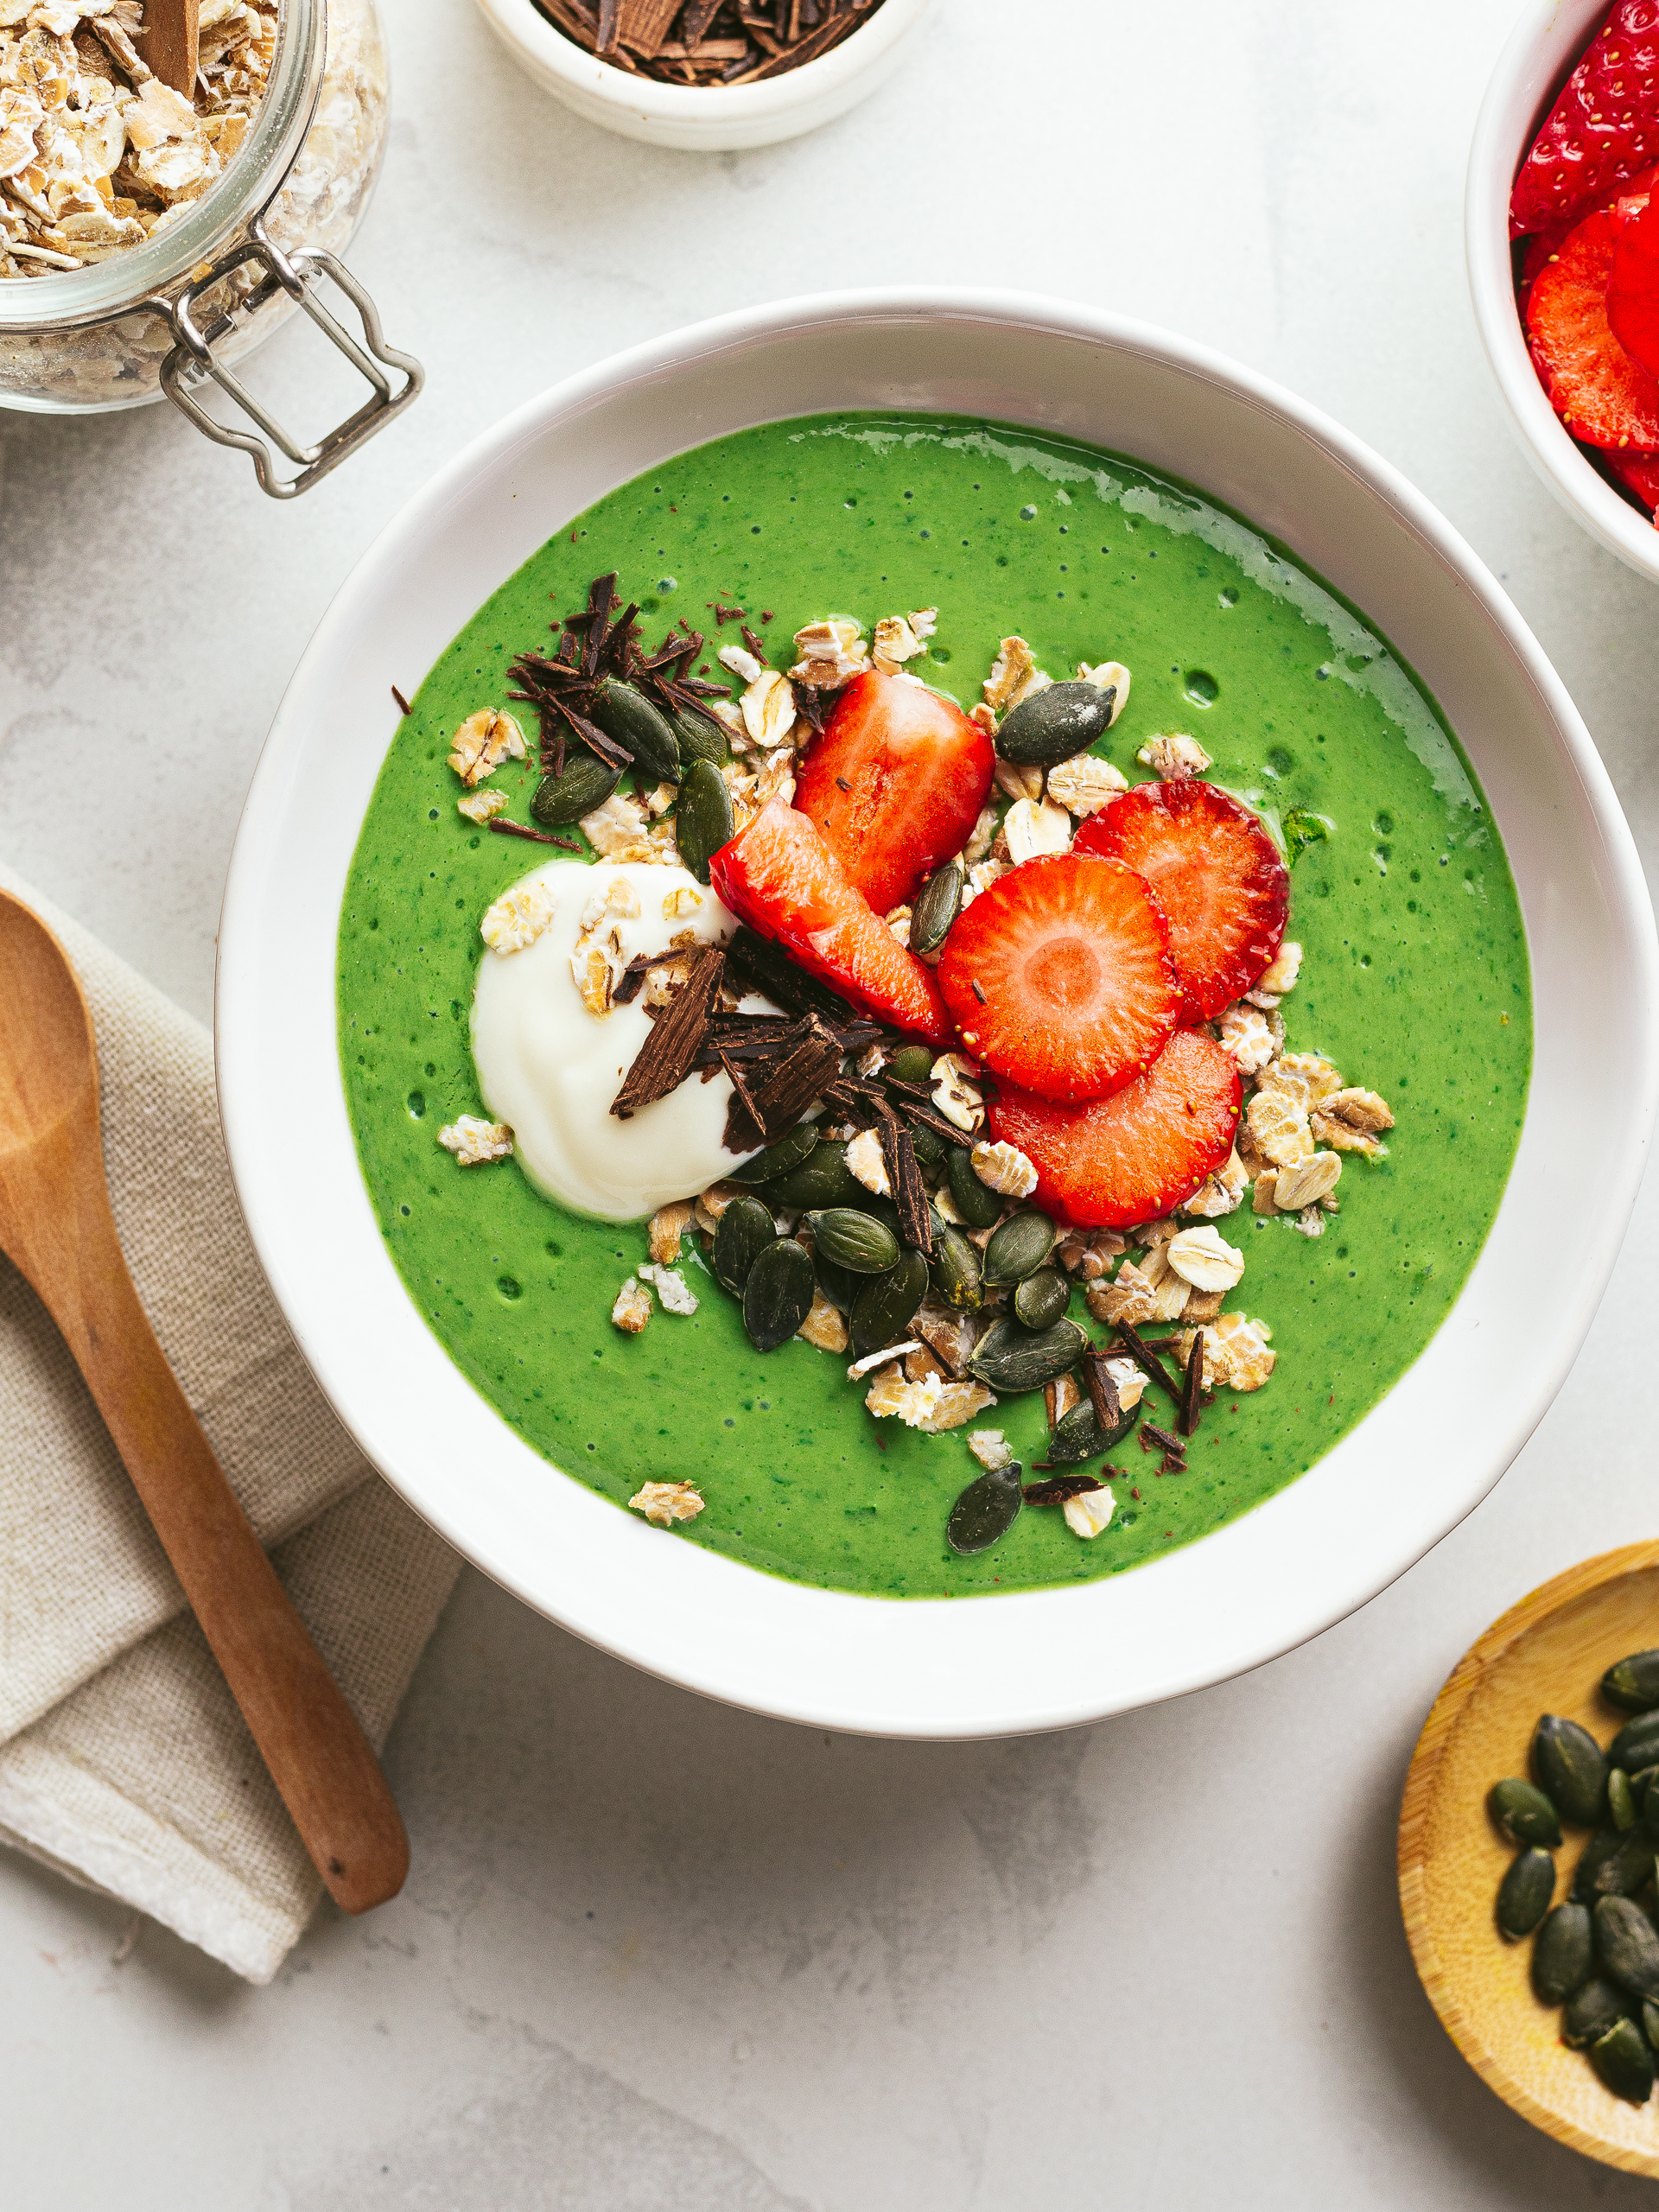 green spinach smoothie bowl with strawberries, oats, and dark chocolate